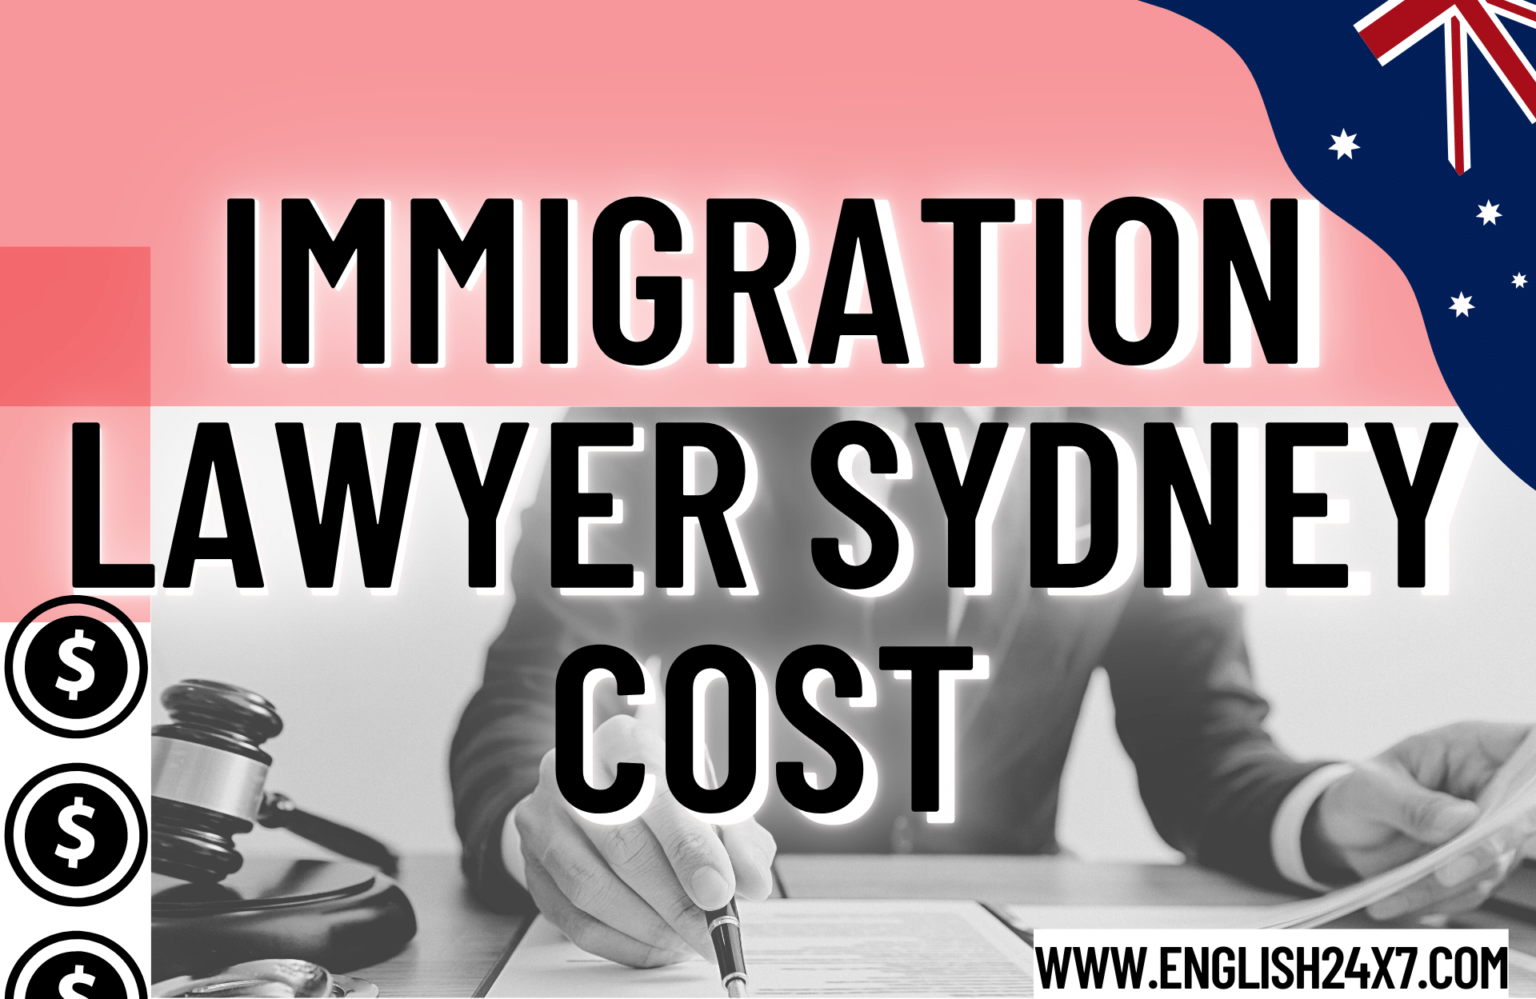 How much do immigration lawyers cost in Sydney?